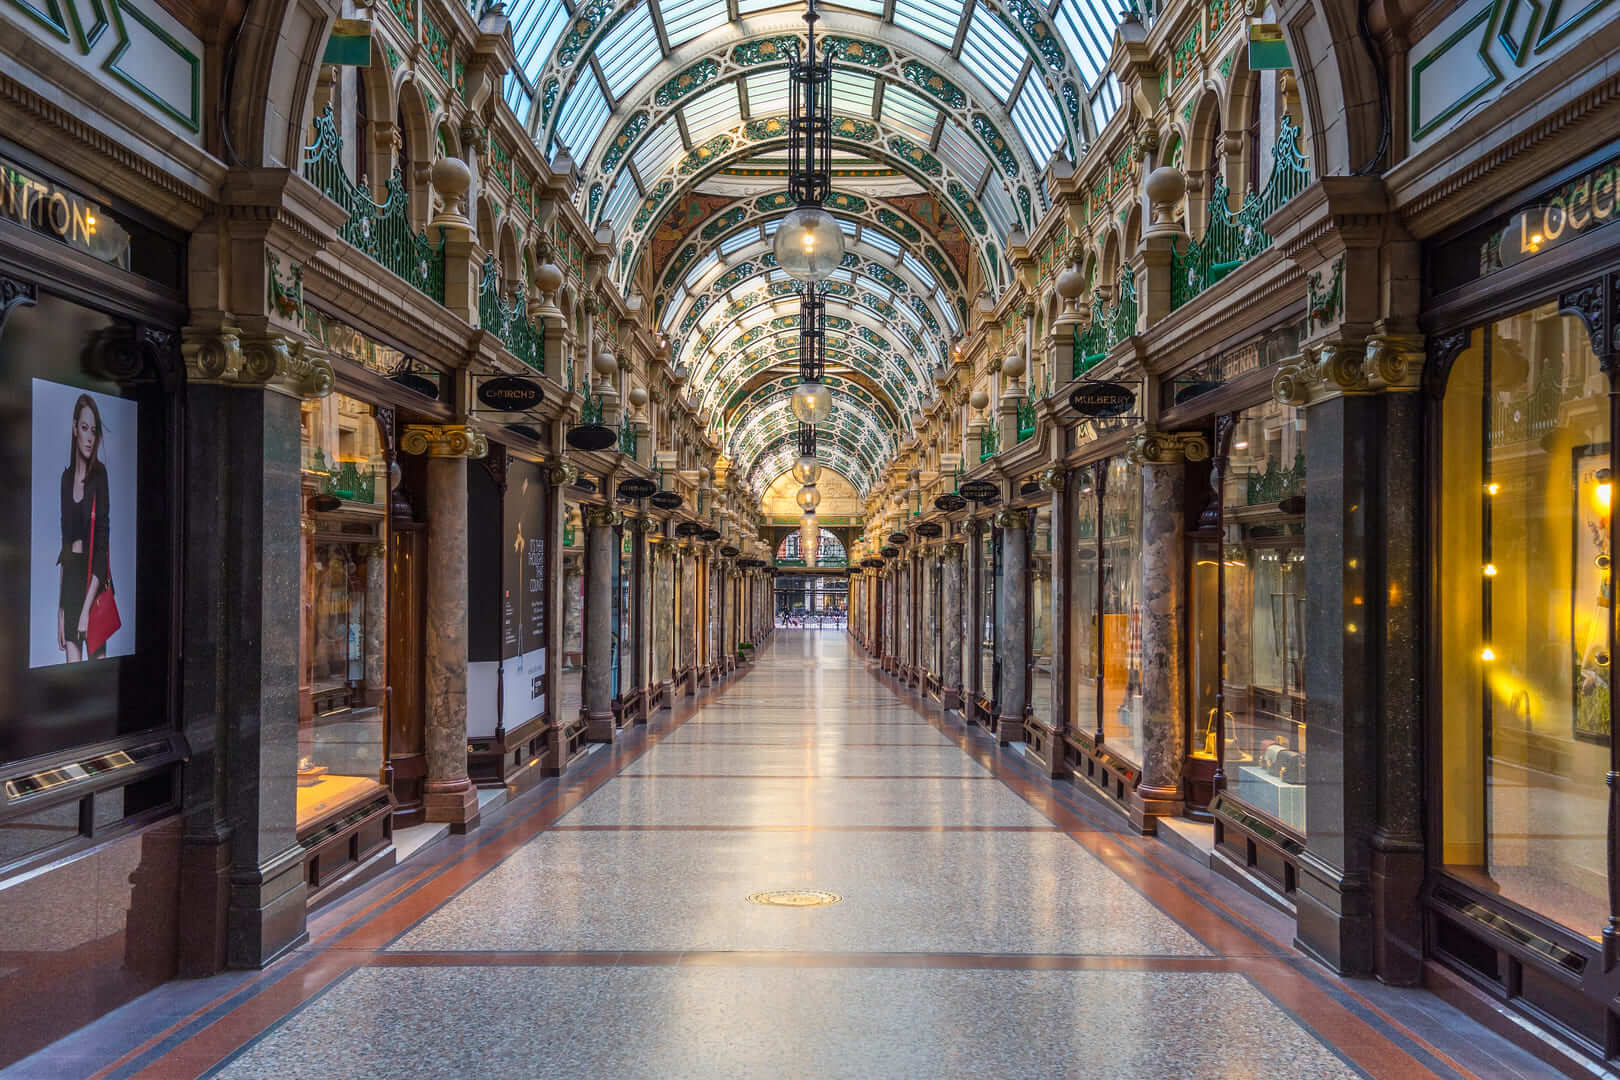 Victoria Quarter, one of the most famous shopping area in Leeds, United Kingdom